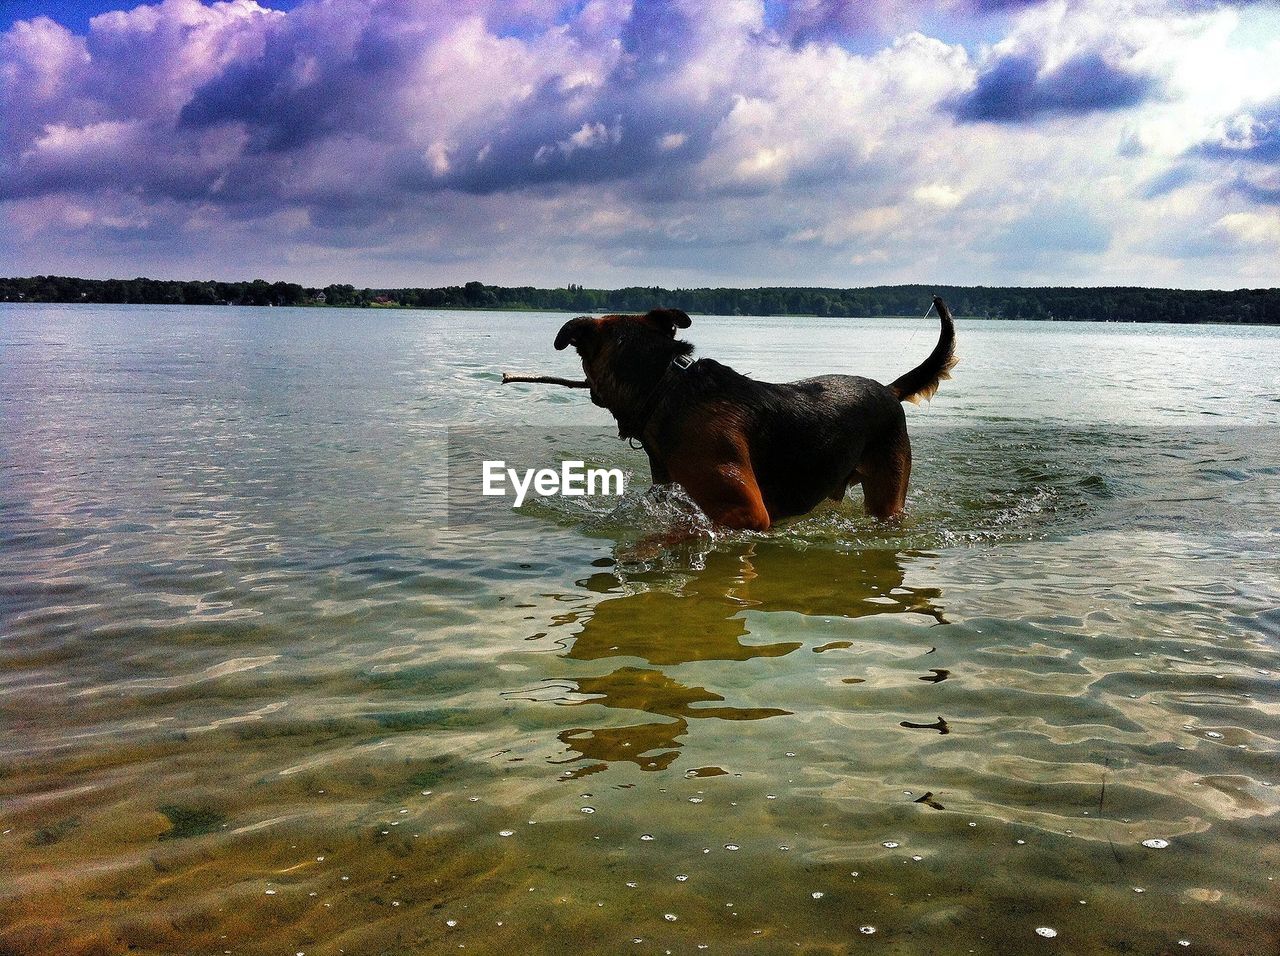 Dog in sea against cloudy sky